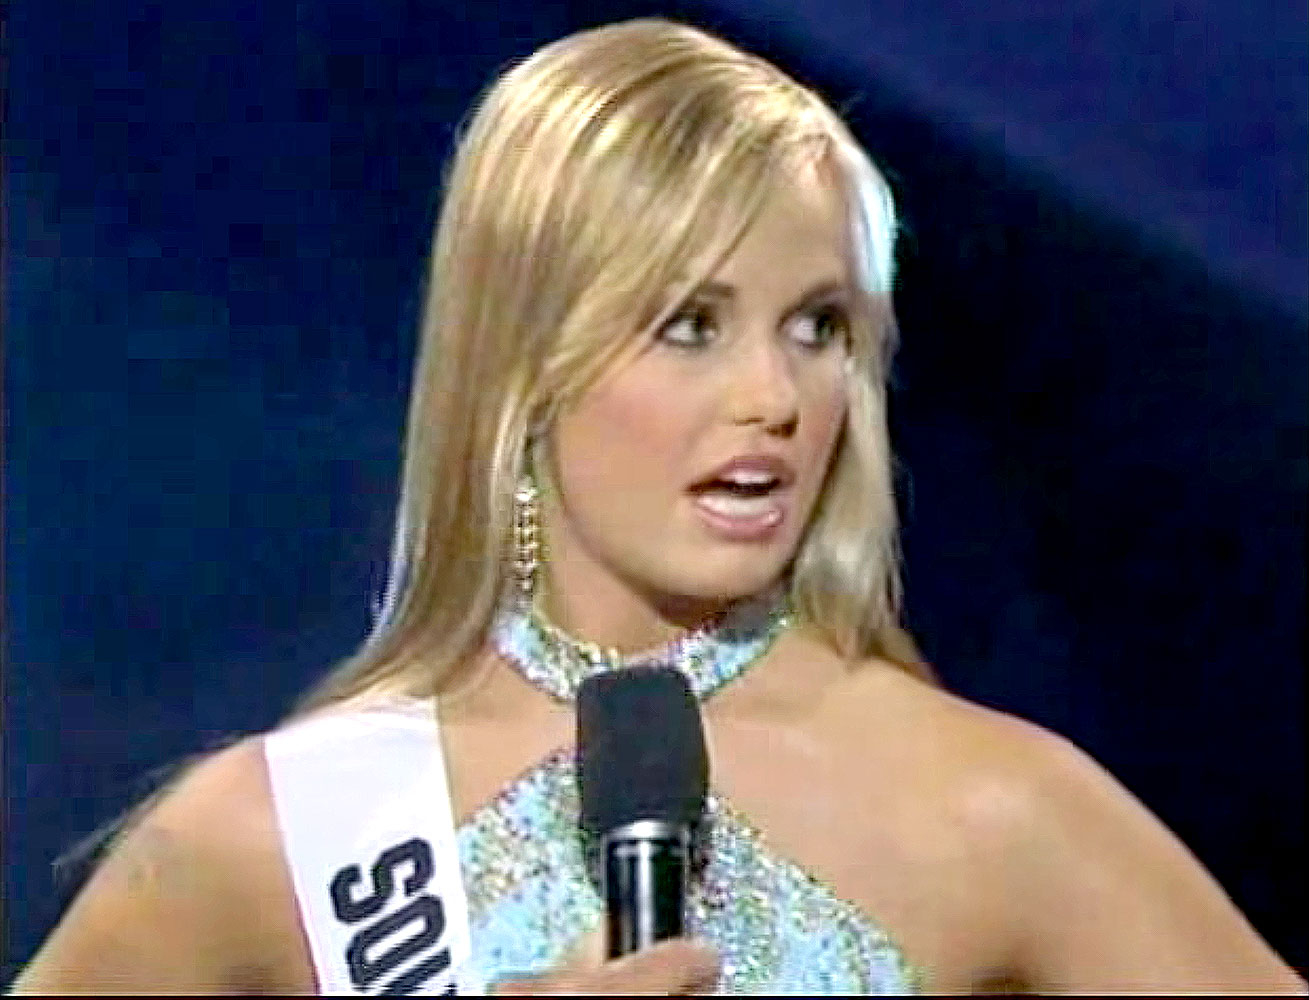 Ms South Carolina Maps Miss South Carolina Teen USA Contemplated Suicide After Pageant Flub